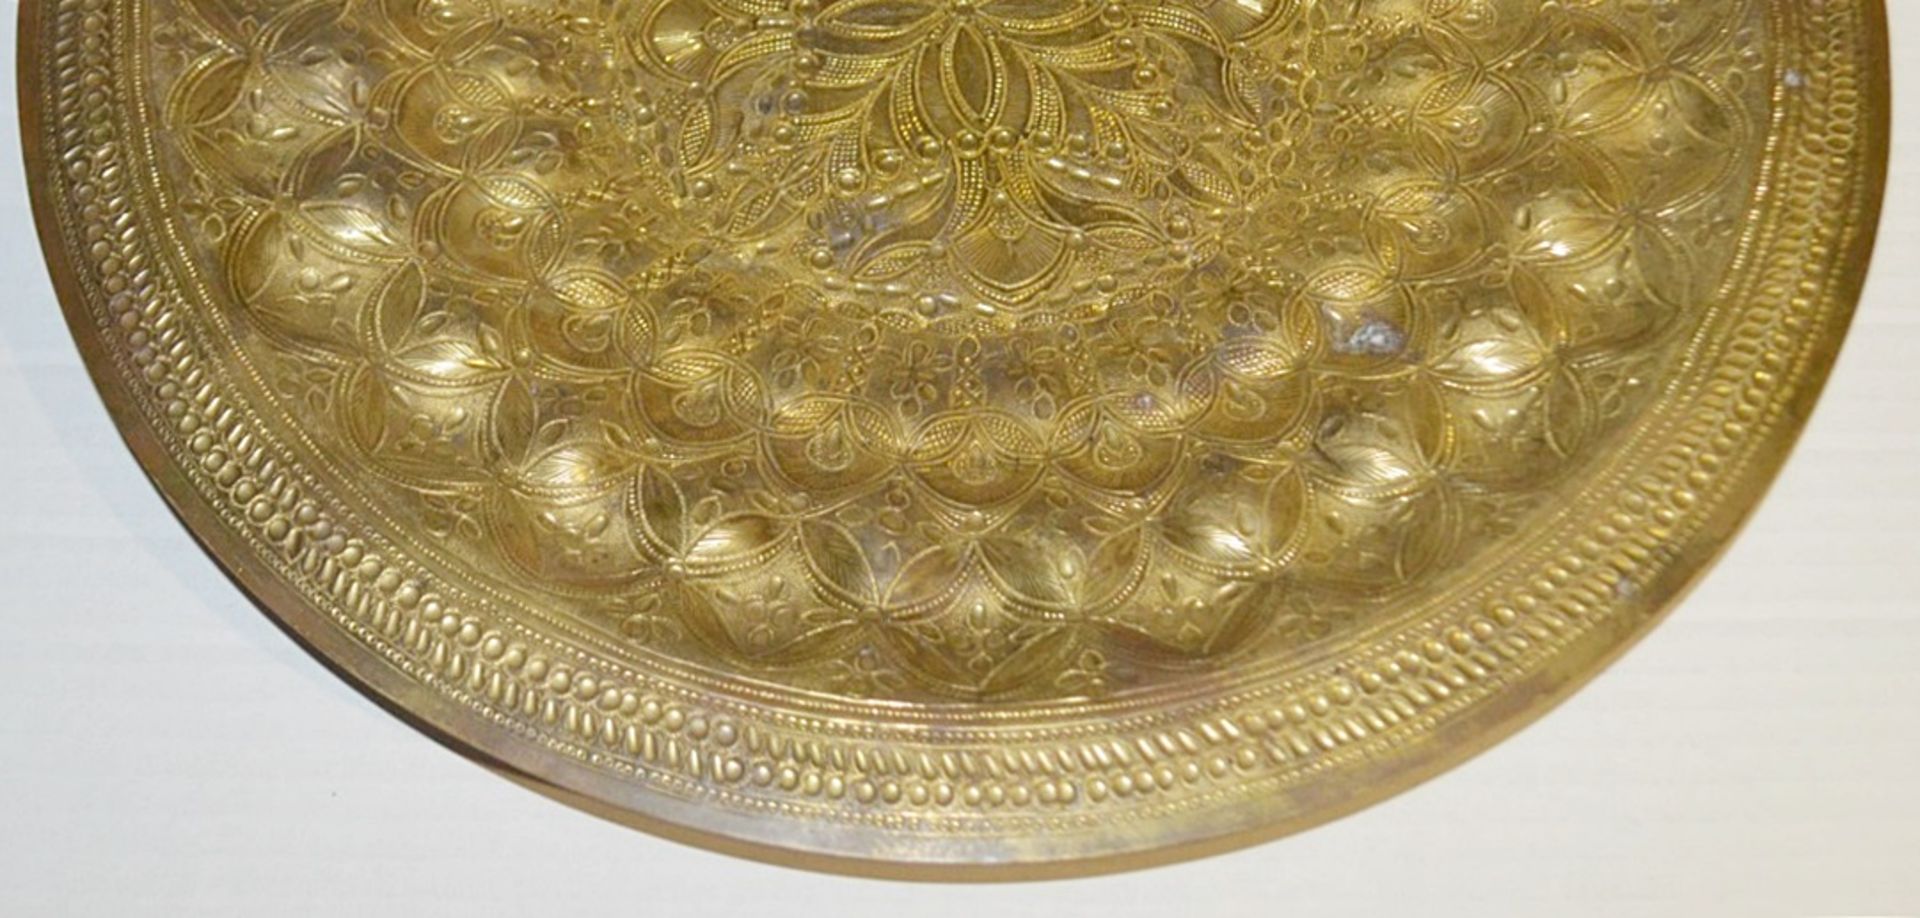 1 x Persian / Ottoman Gilt Metal Tombak Charger - 35cm (13.75ins) In Diameter - Preowned - NO VAT ON - Image 4 of 5